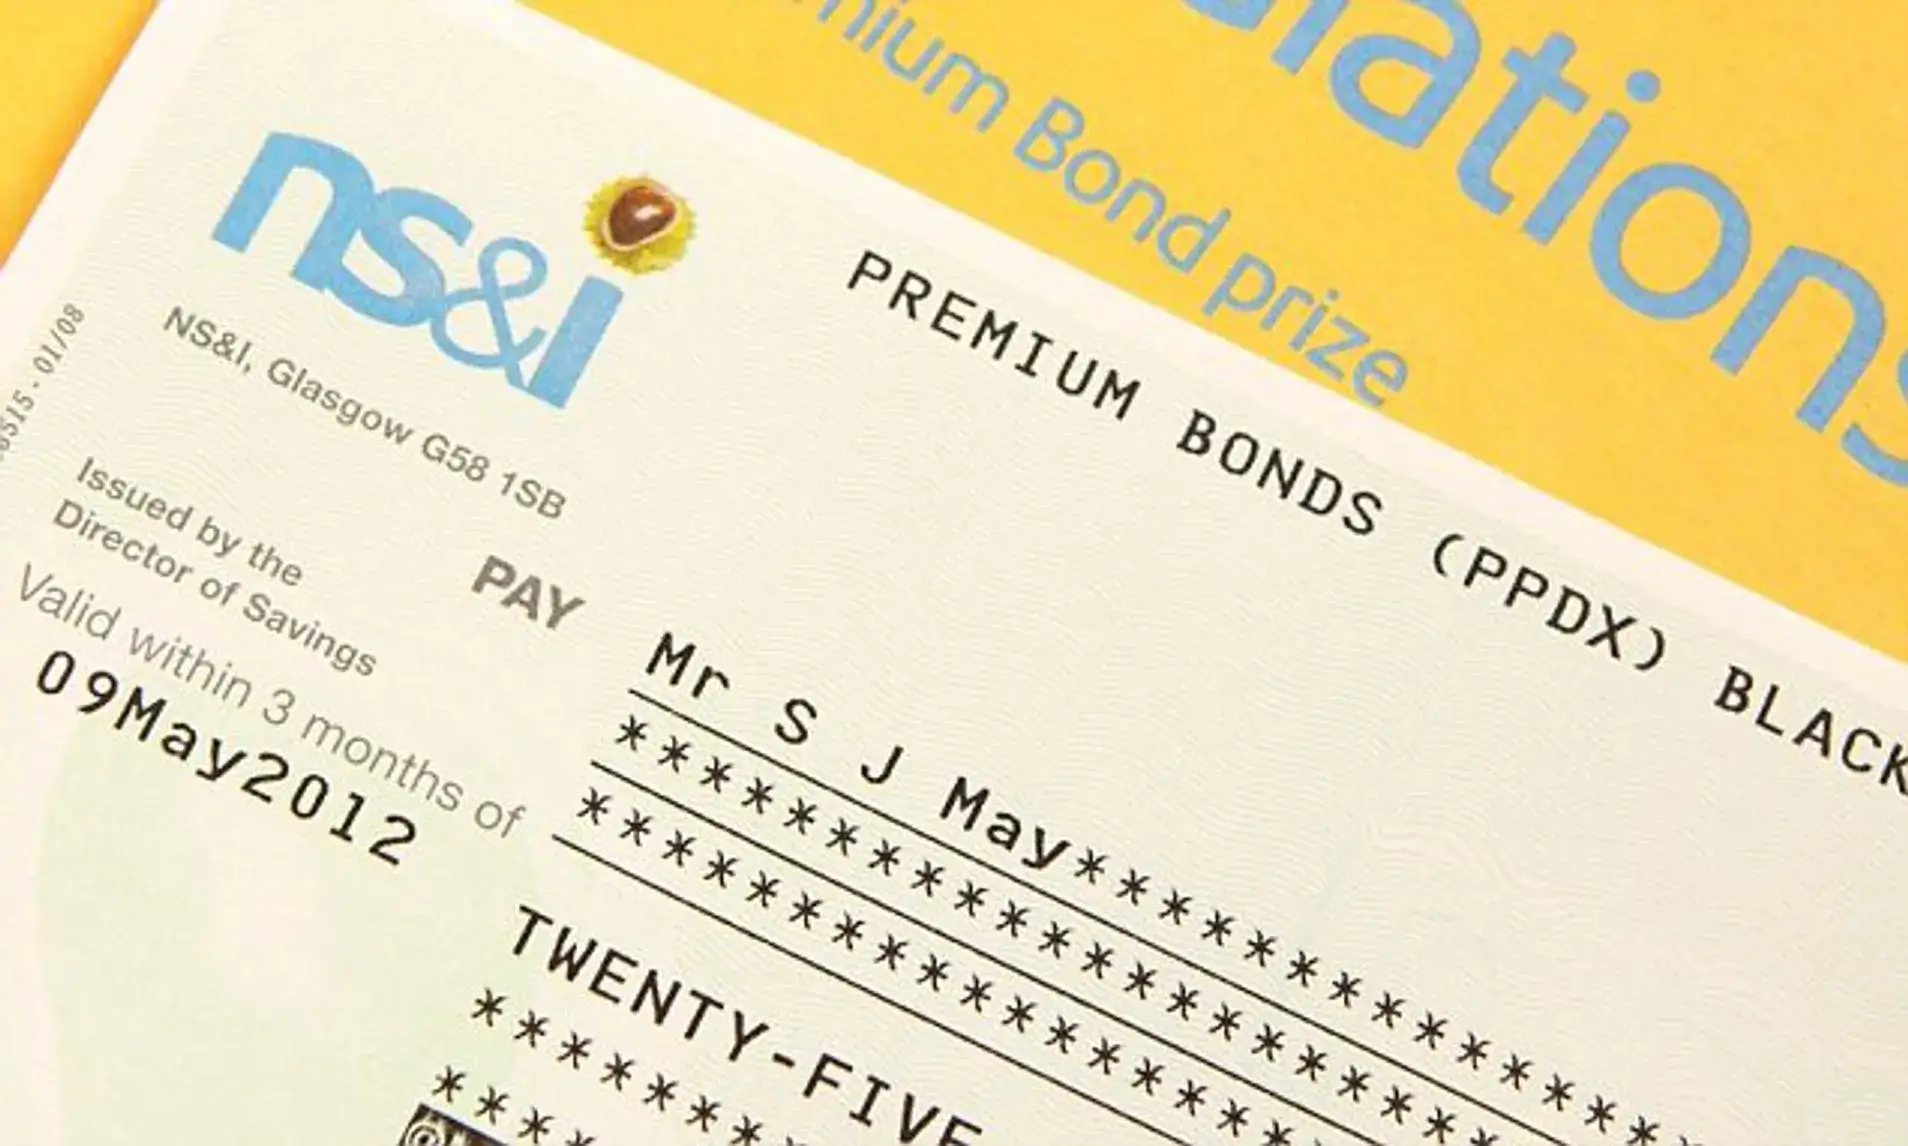 How to purchase and manage Premium Bonds